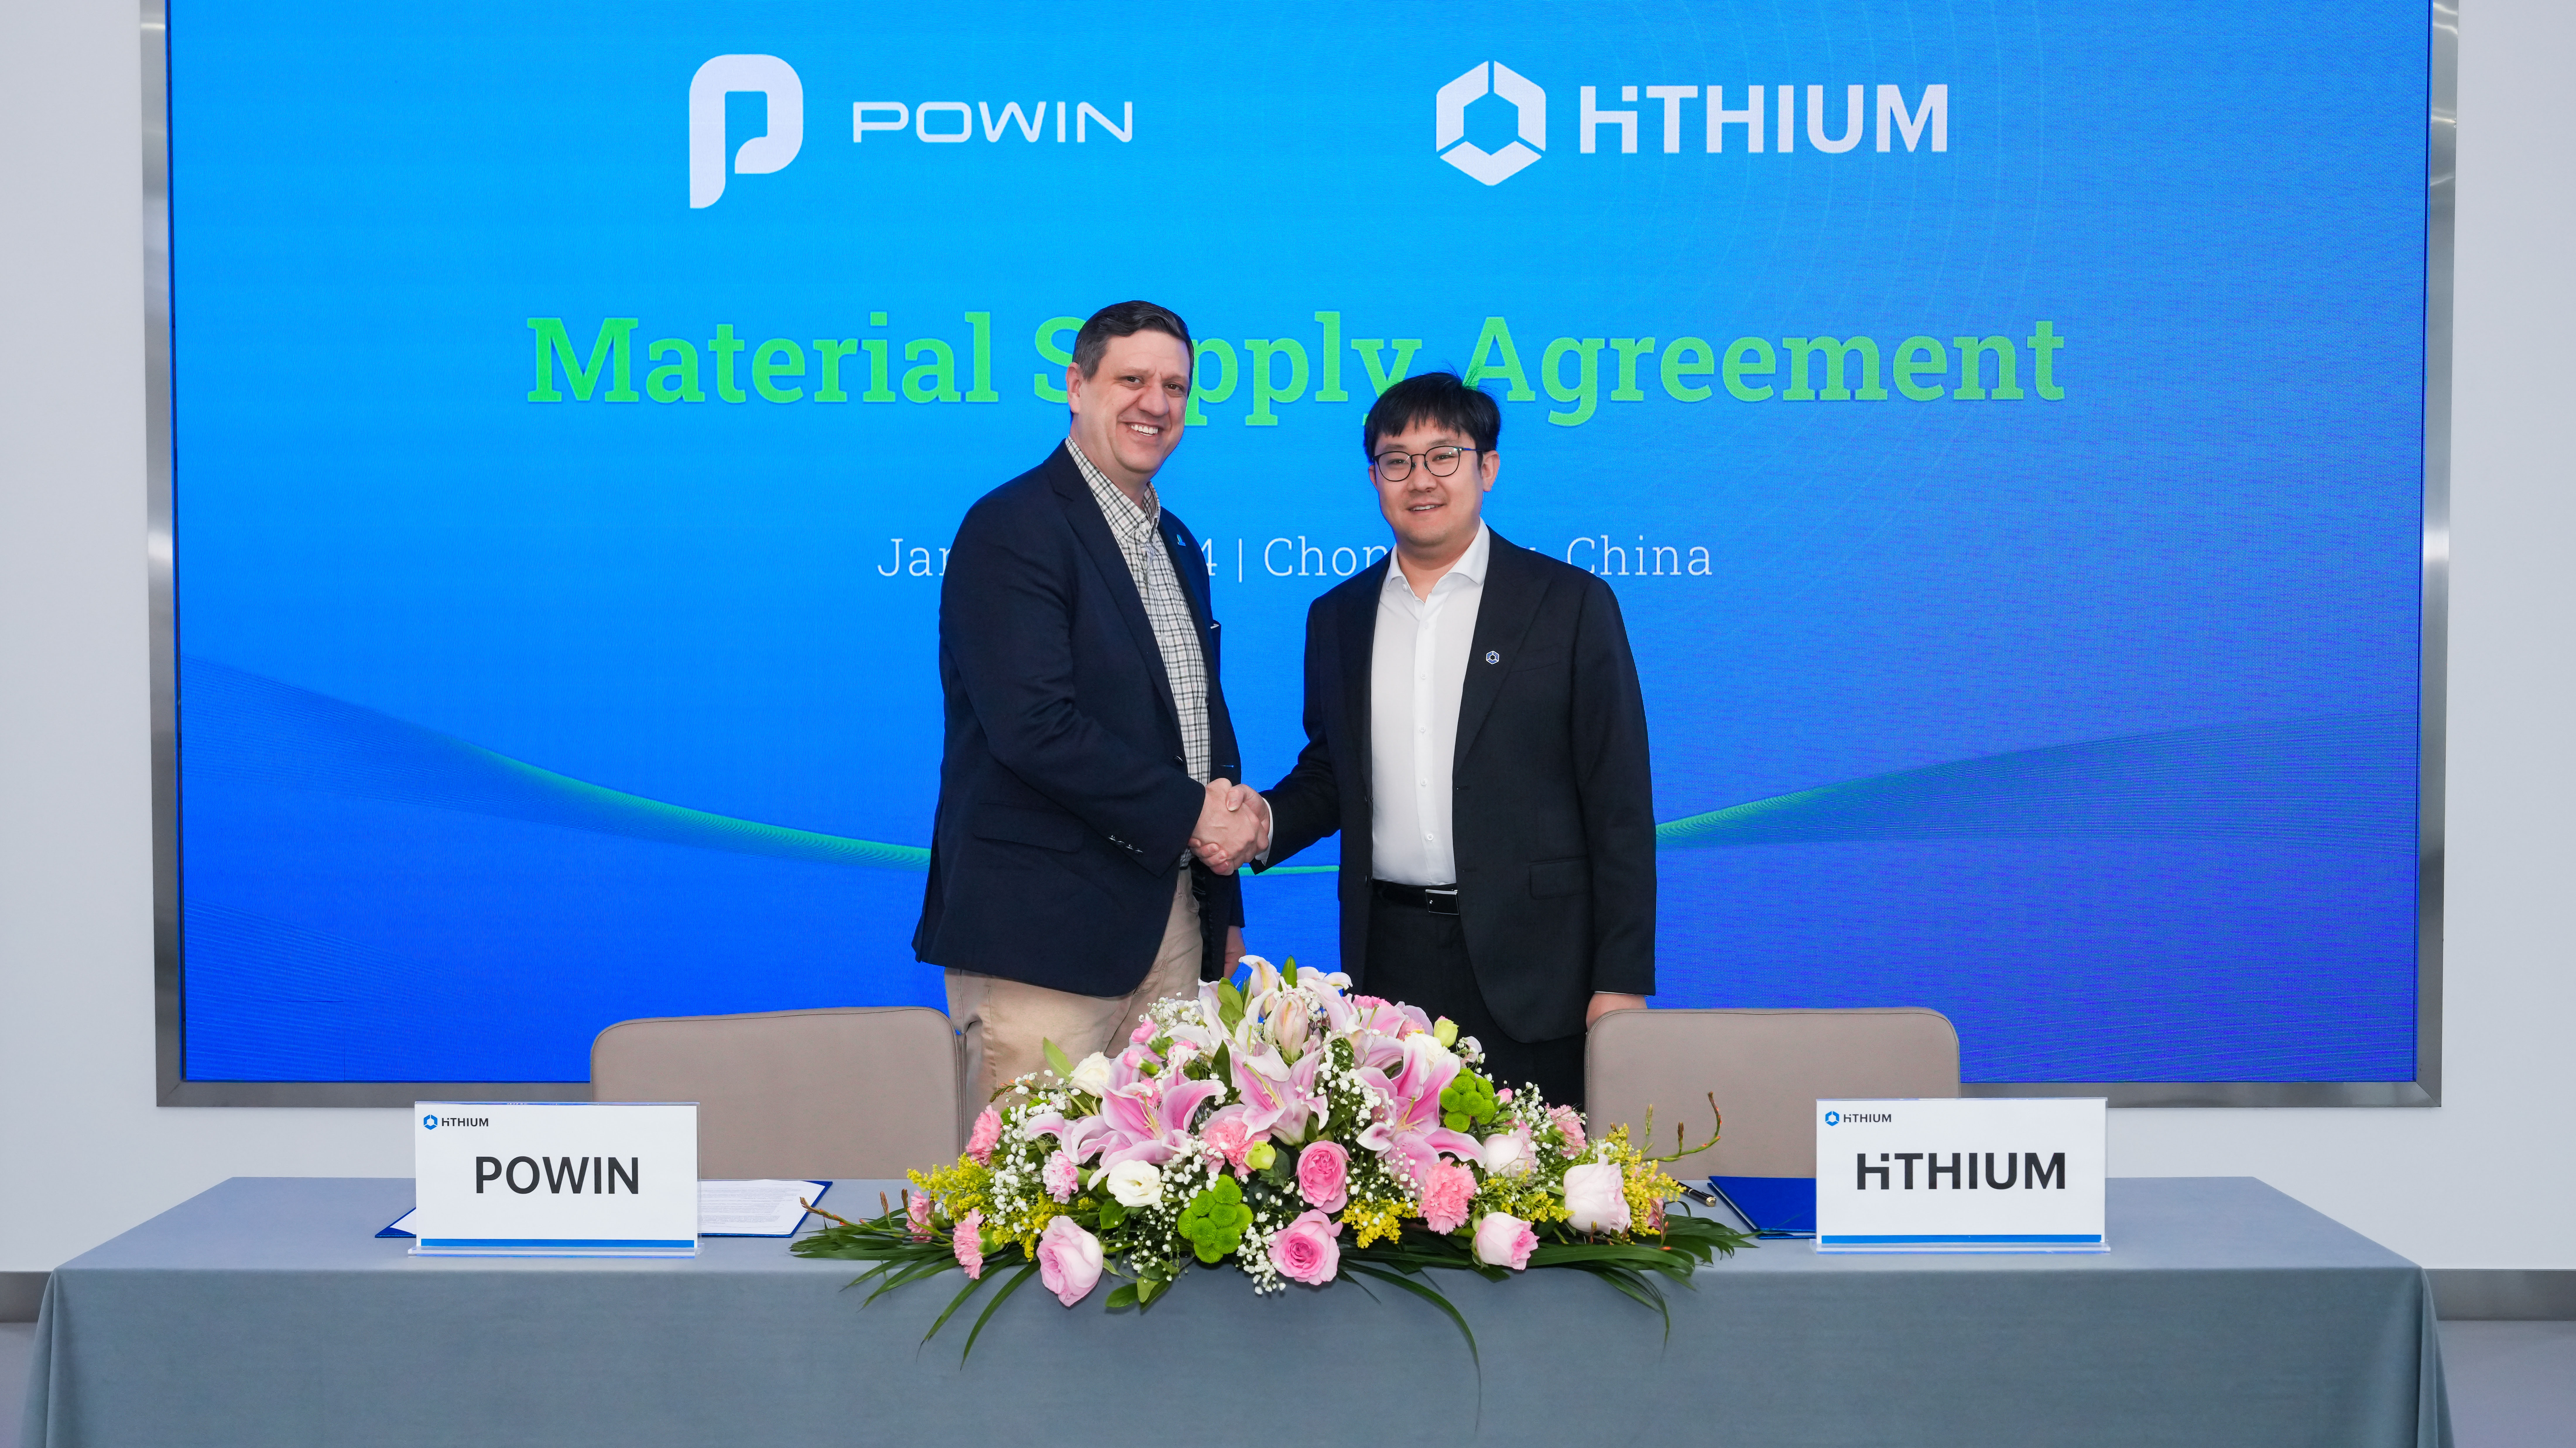 Hithium to supply Powin with 5GWh battery cells